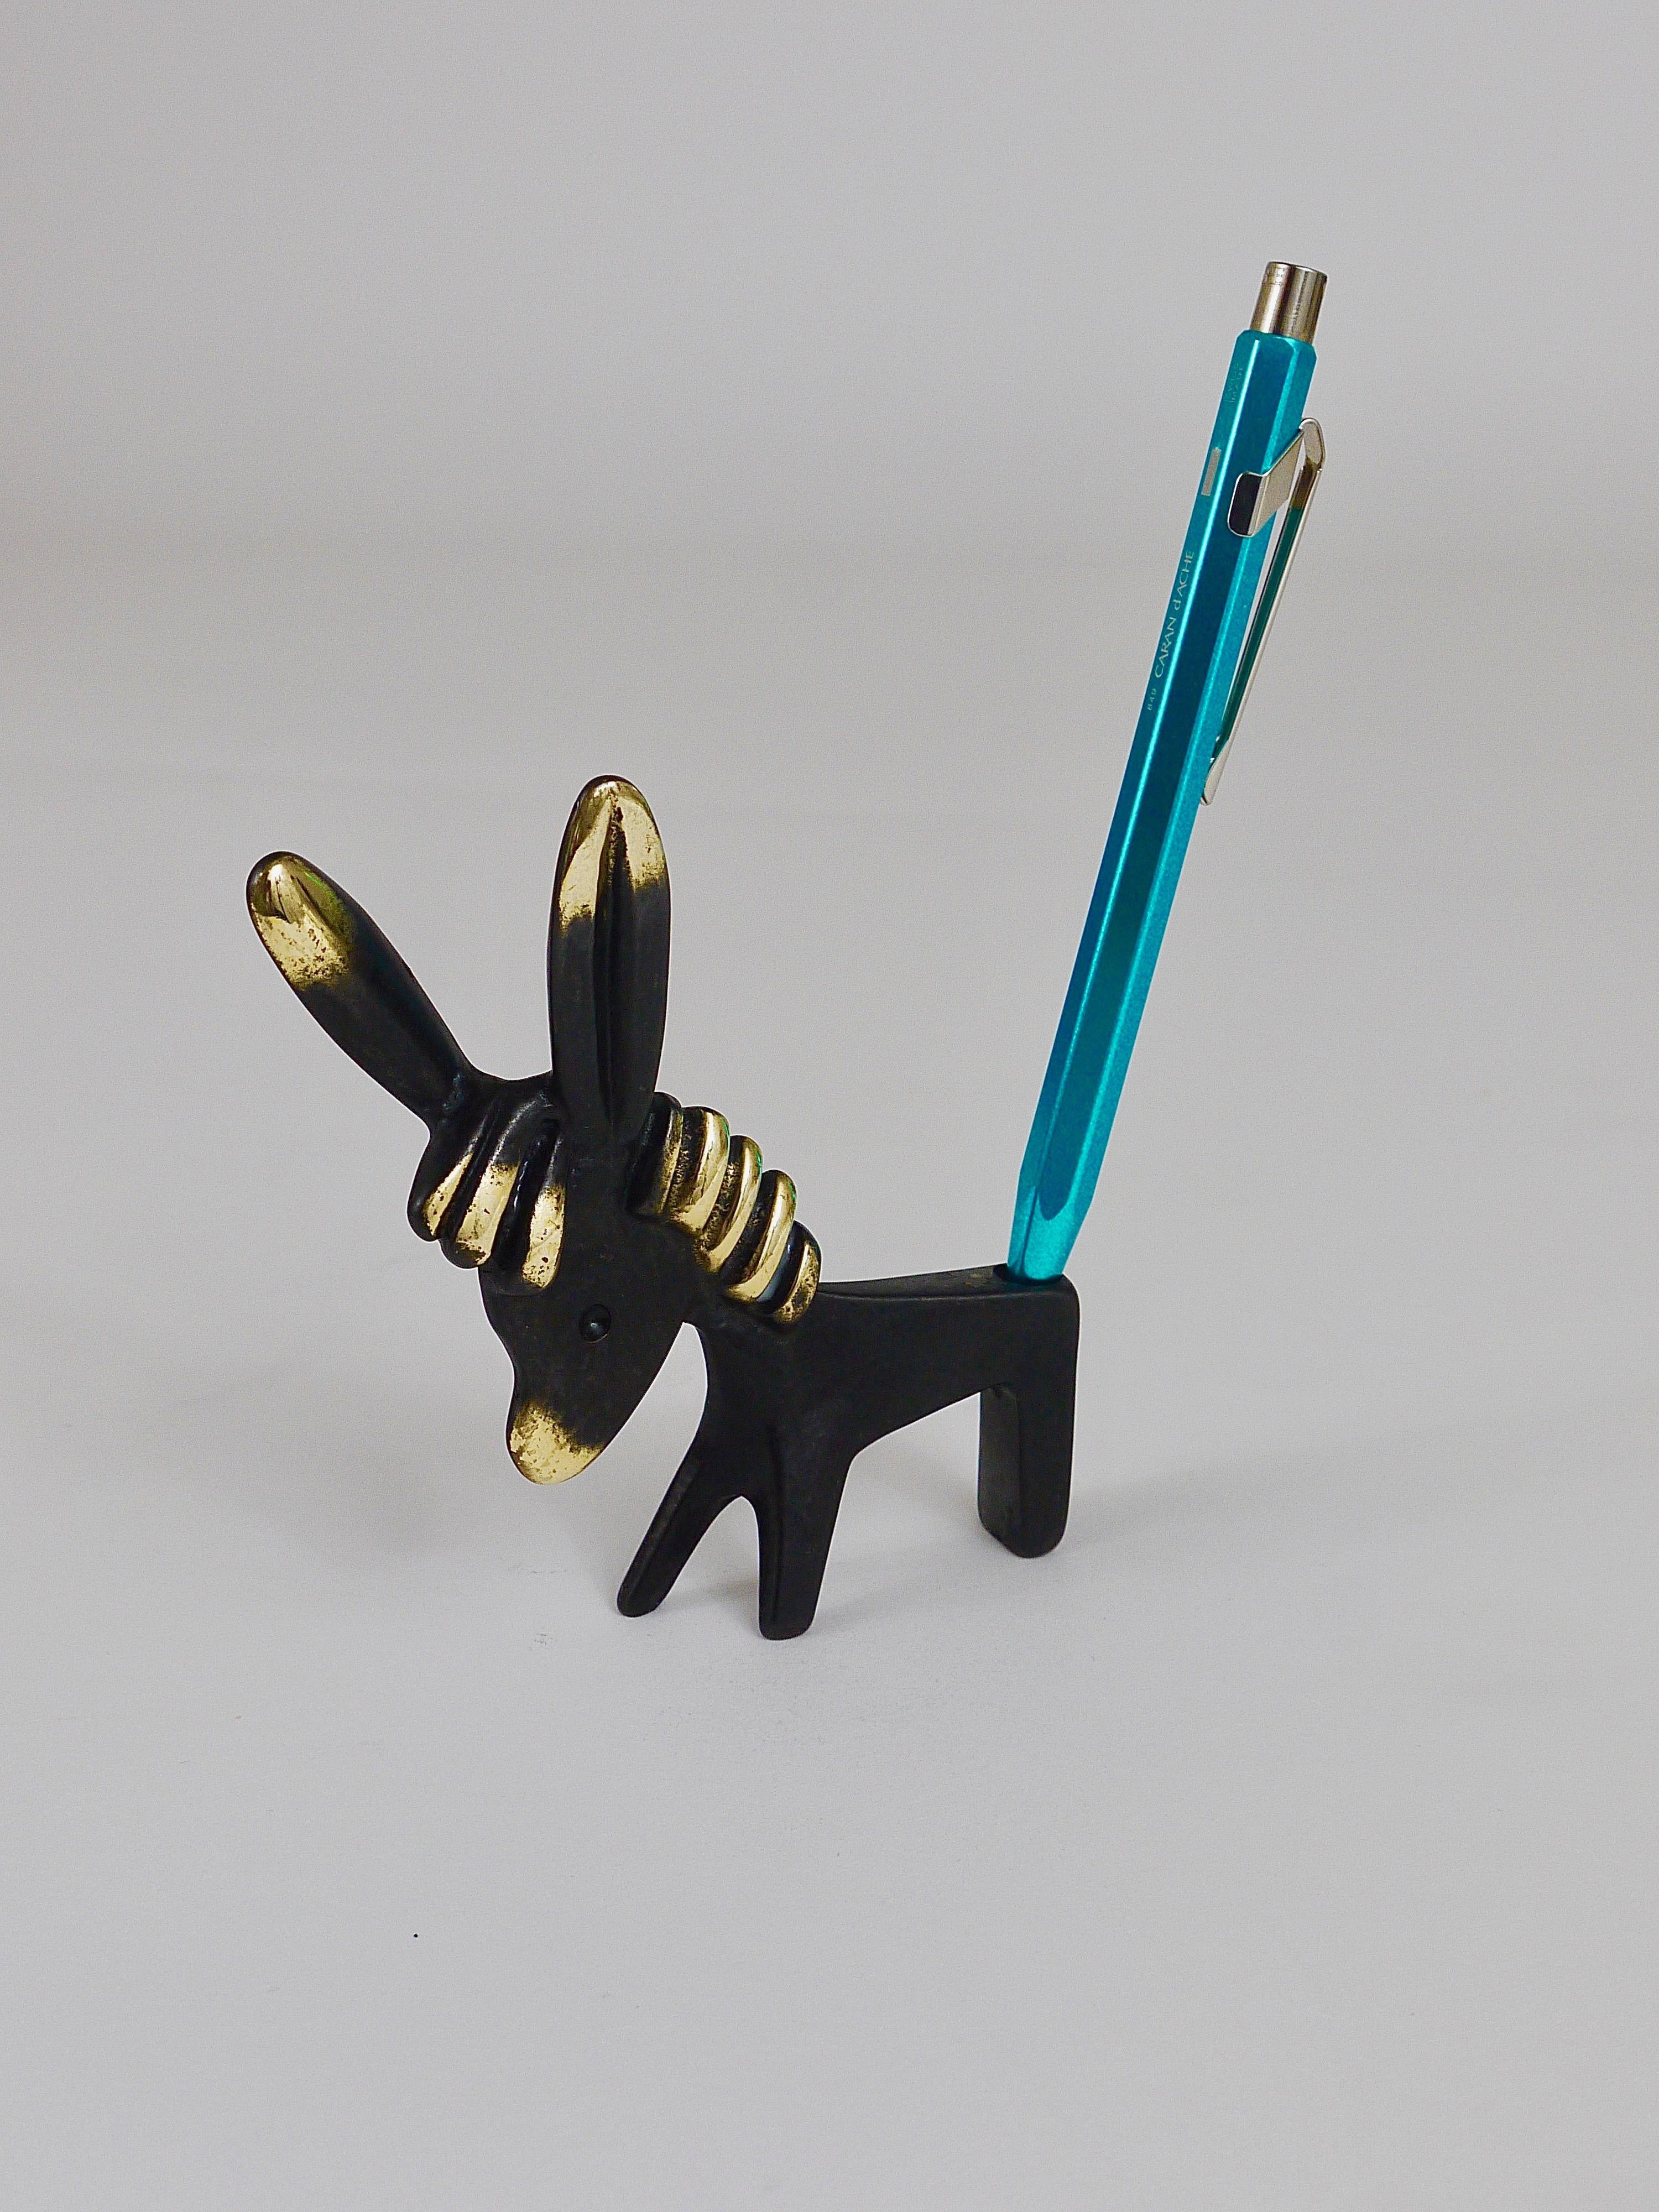 A very charming Austrian midcentury pen or pencil holder, displaying a donkey. A very humorous design by Walter Bosse executed by Herta Baller Austria in the 1950s. Made of brass in excellent condition.